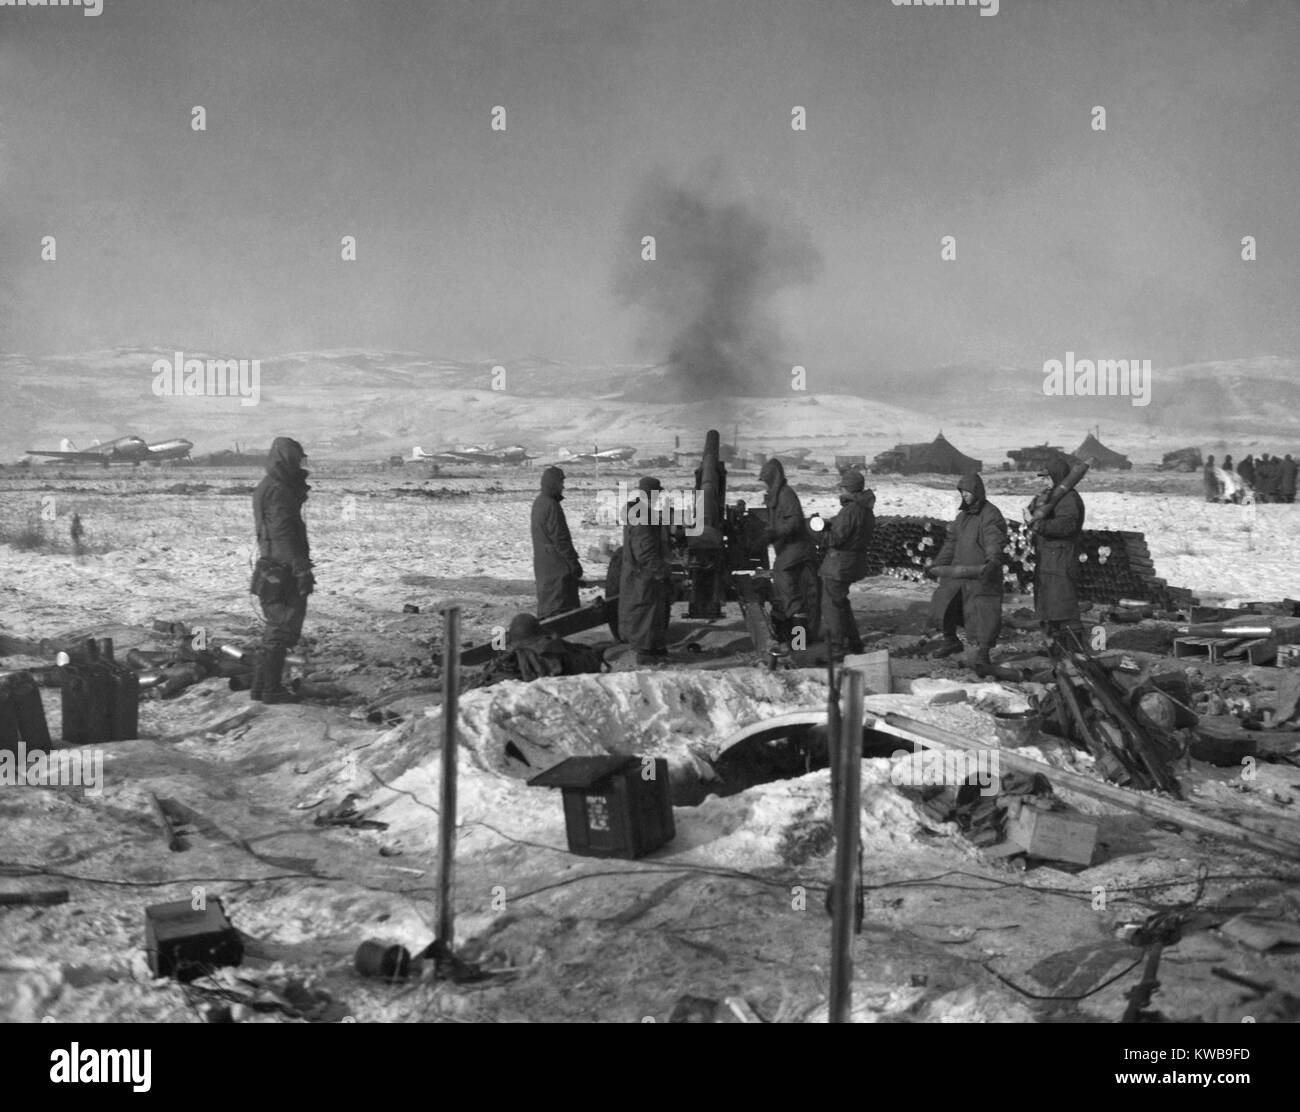 Marine 105mm howitzers defend Hagaru-ri airstrip from Chinese army as planes evacuate wounded. Guns fire right over airfield into nearby hills as main body of 1st Marine Division returns from Chosin Reservoir area from Yudam-Ni. Nov. 28 -Dec. 3, 1950. Korean War, 1950-53. (BSLOC 2014 11 82) Stock Photo